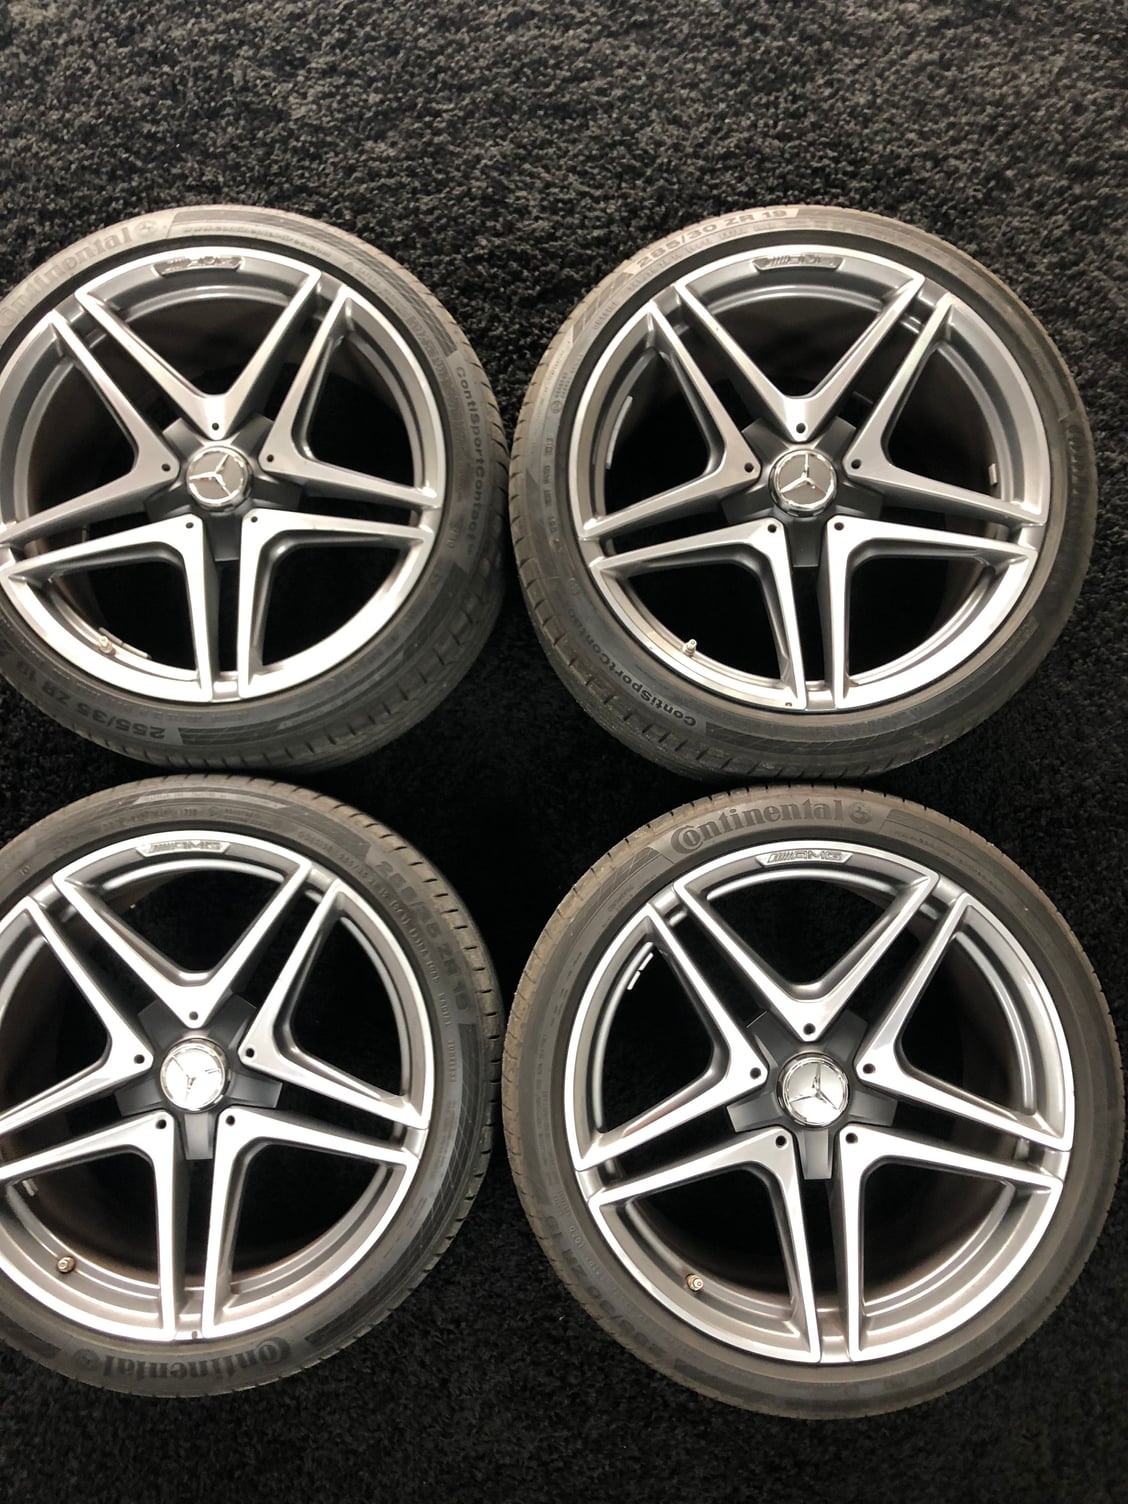 Wheels and Tires/Axles - 2017 Mercedes C63S 19 inch OEM amg star wheels, tires and tpms - Used - 2017 to 2018 Mercedes-Benz C63 AMG S - Los Angeles, CA 91214, United States